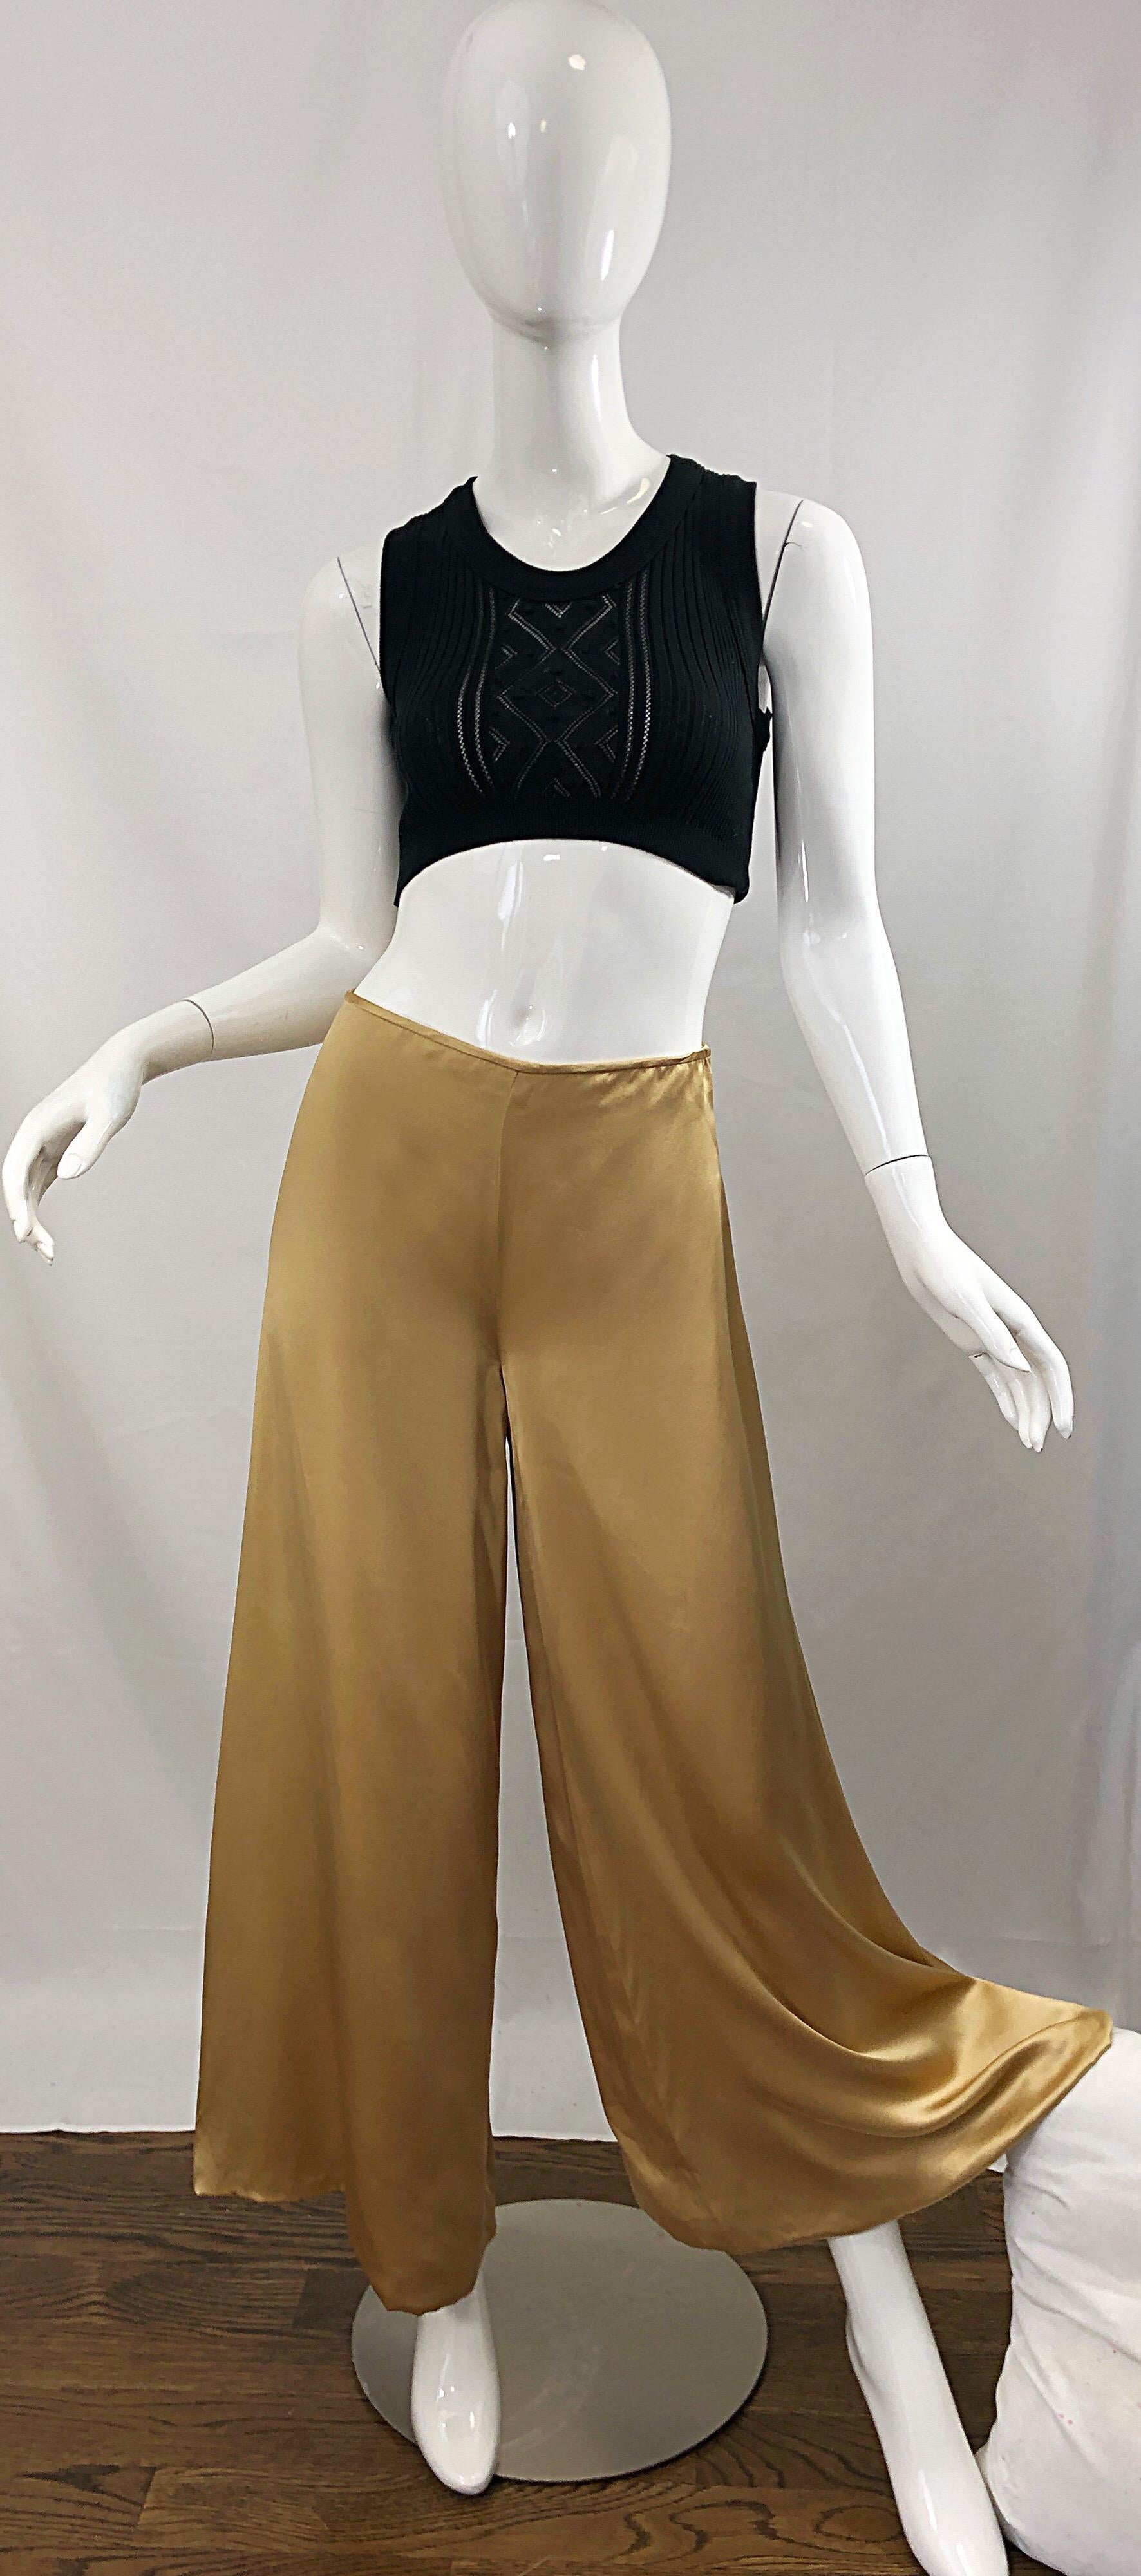 Insanely chic early 2000s REEM ACRA liquid gold silk wide leg trousers! Fine luxurious silk that moves like liquid. Long wide legs elongate the body. Hidden zipper up the side with hook-and-eye closure. The perfect alternative to a skirt! Super